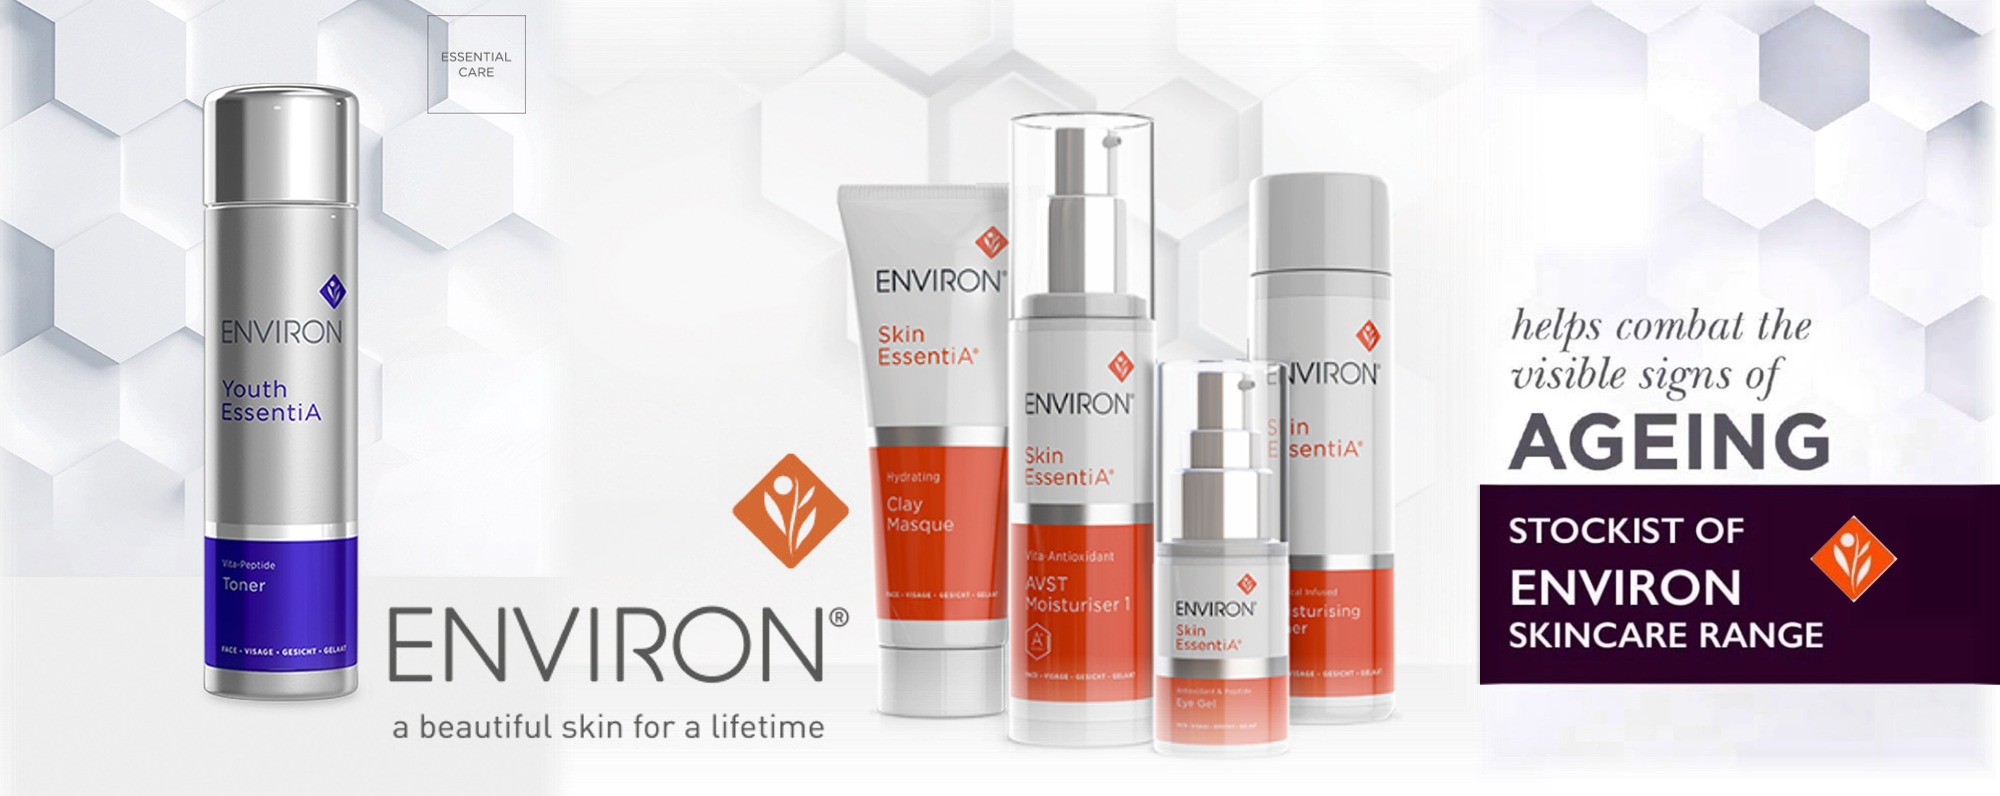 Combat visible signs of aging with Environ vitamin, collagen and purifying beauty treatments, a beautiful skin for a lifetime, from Catherine's Laser & Beauty Salon, Letterkenny, County Donegal, Ireland  - cutting edge cosmetics